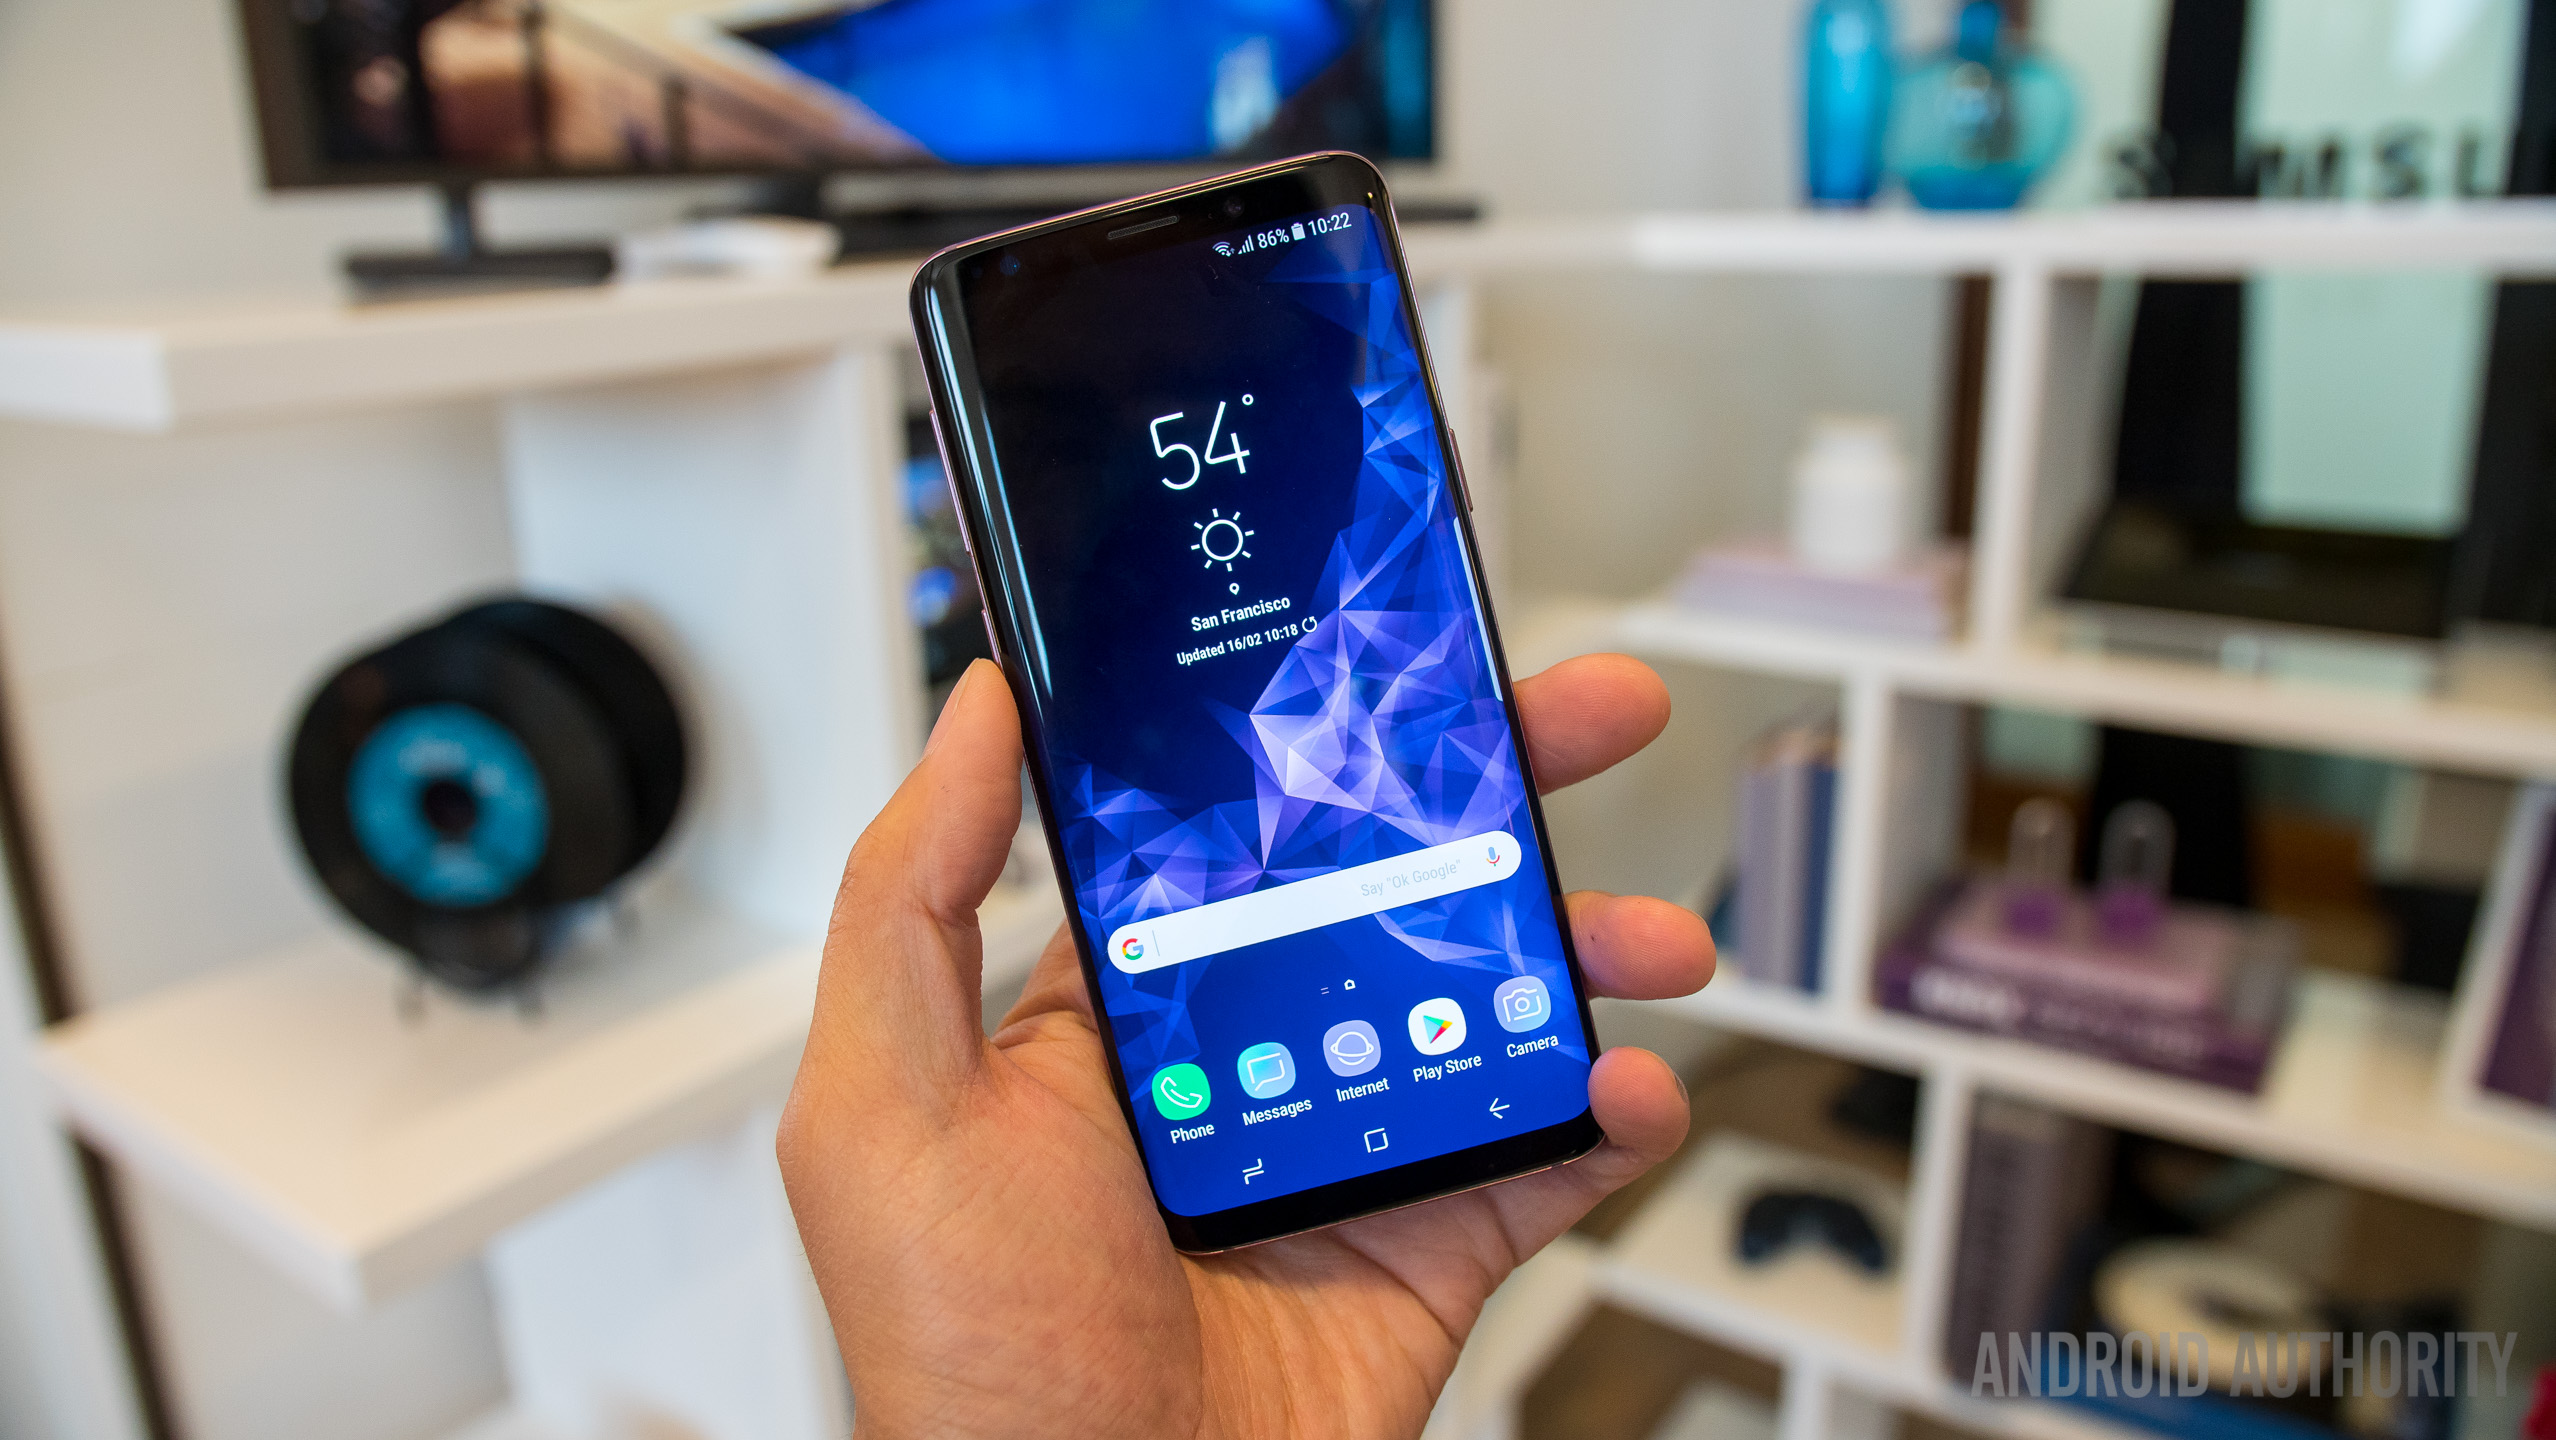 The Samsung Galaxy S9 from Sprint